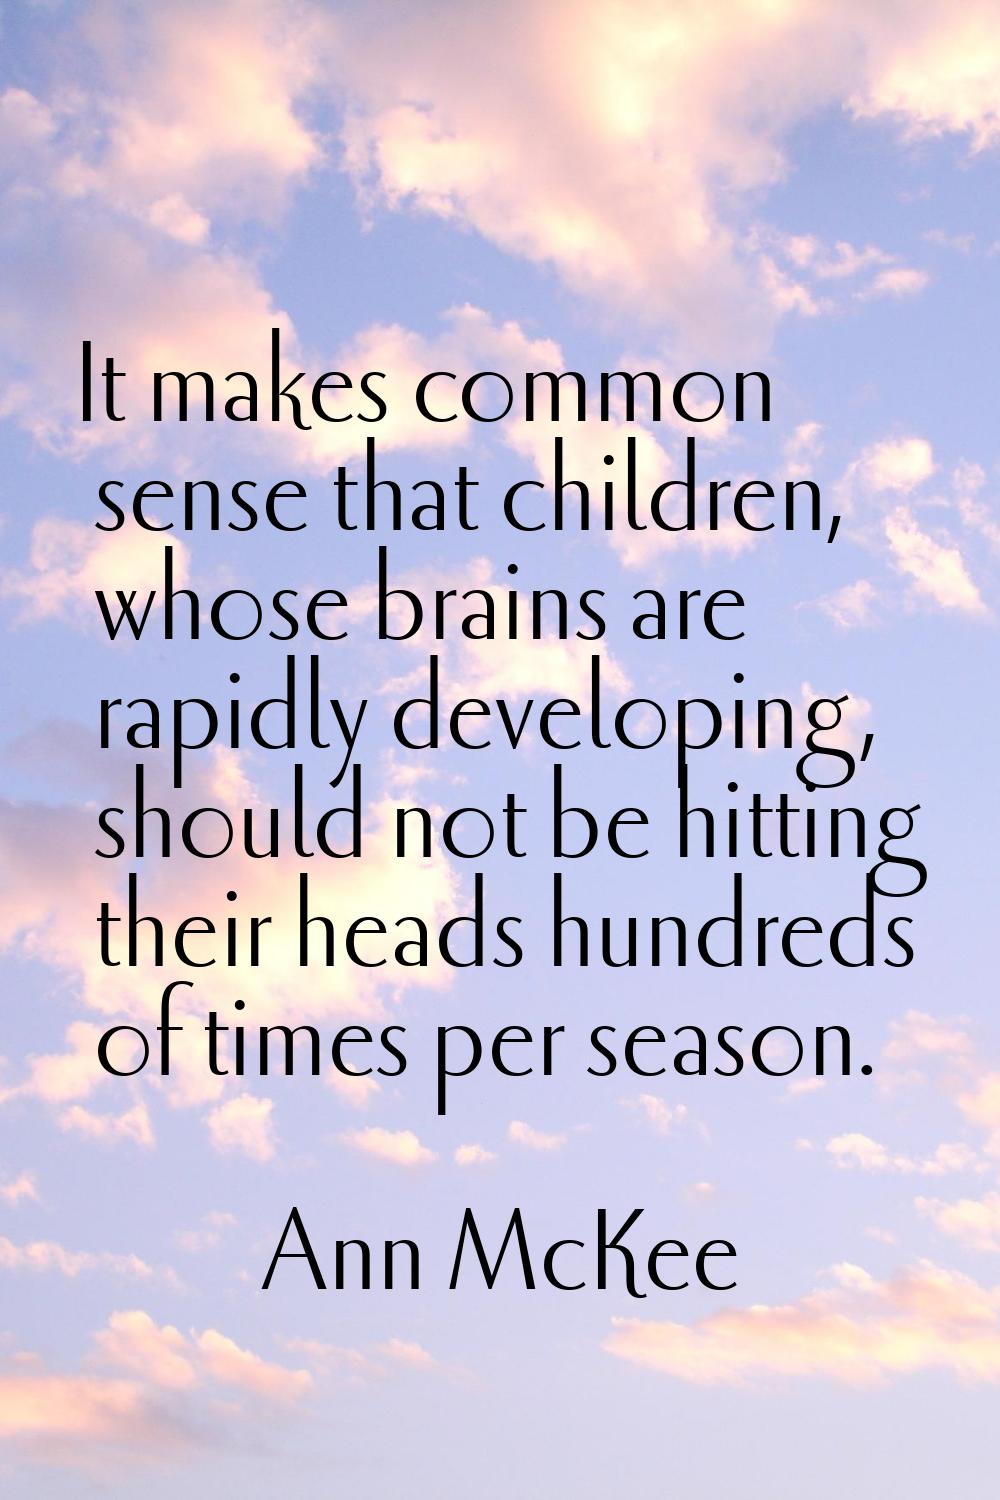 It makes common sense that children, whose brains are rapidly developing, should not be hitting the